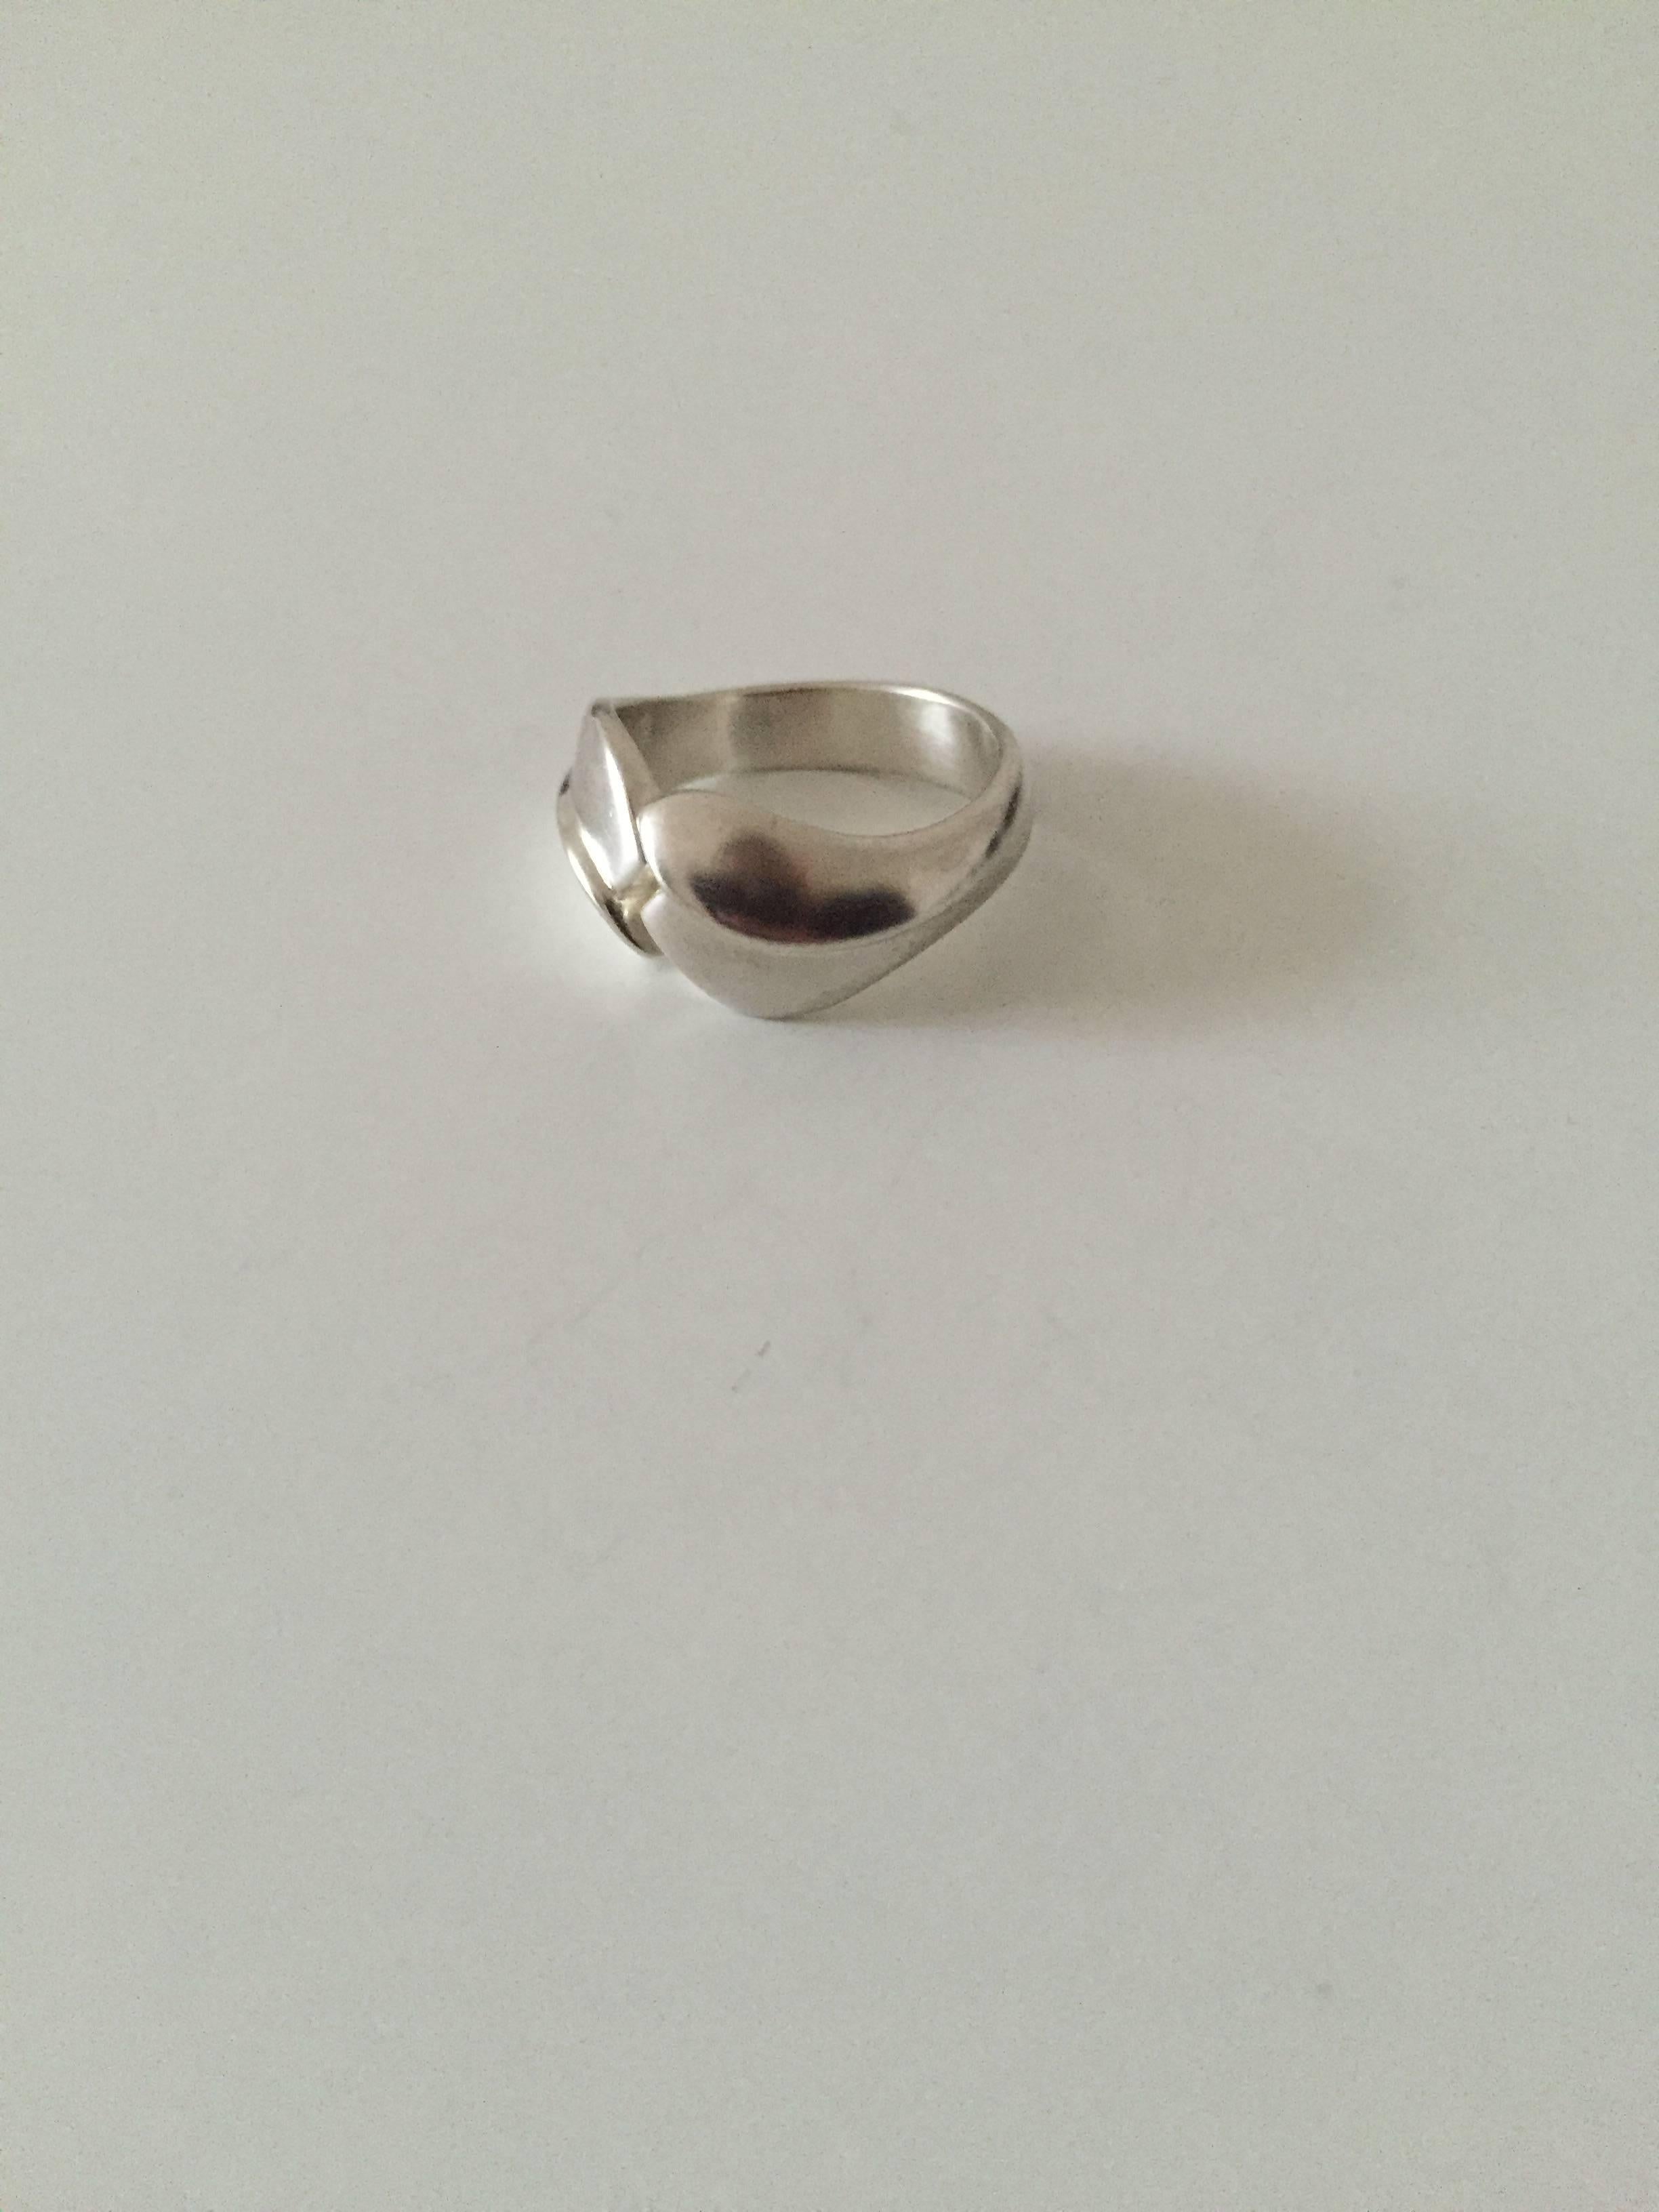 Georg Jensen sterling silver modern ring.

Ring size 52. 
Weighs 6.5 g / 0.23 oz

Georg Jensen (1866-1935) opened his small silver atelier in Copenhagen, Denmark in 1904. By 1935 the year of his death, he had received world acclaim and was